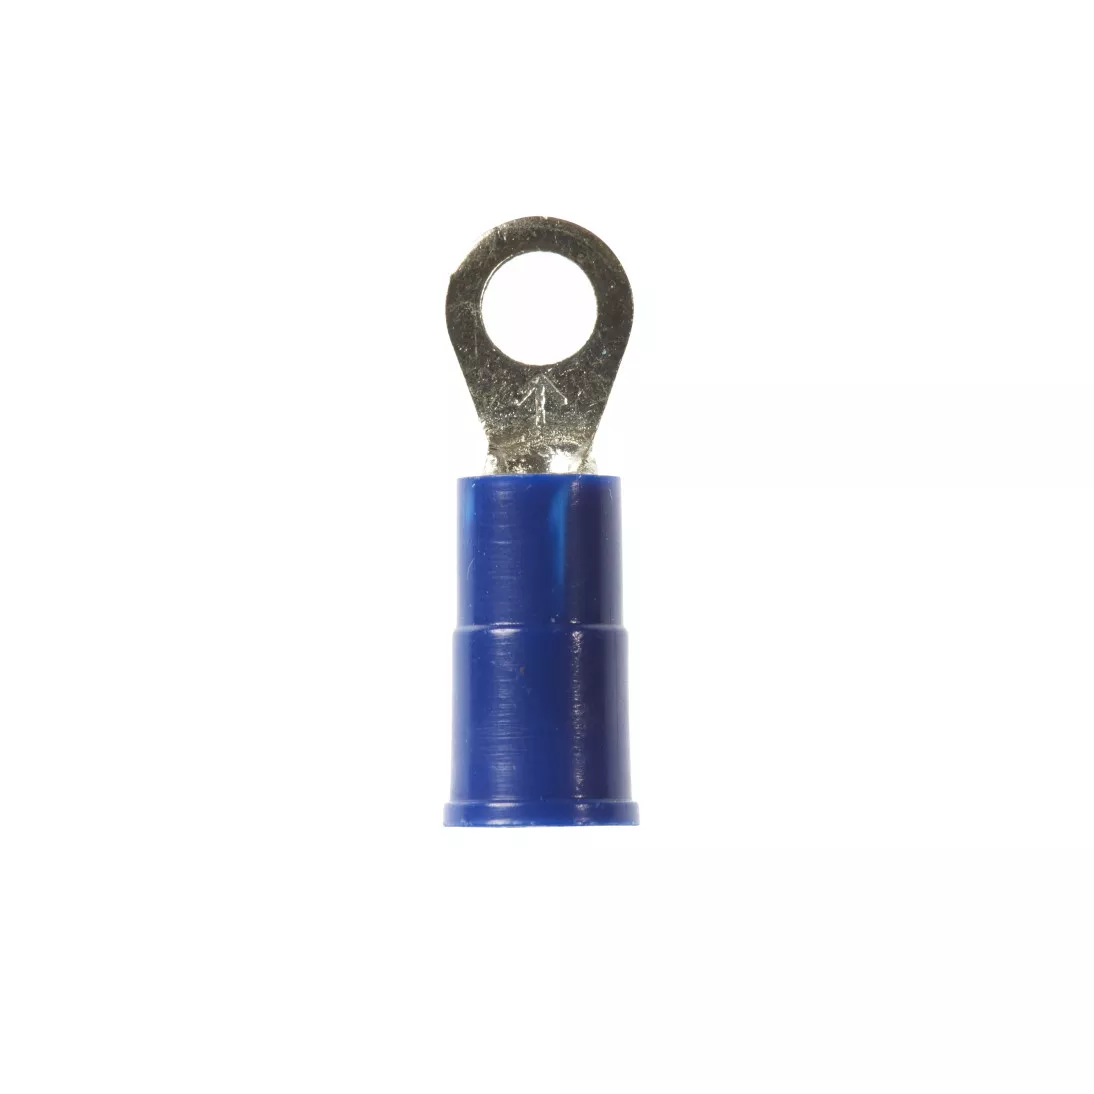 3M™ Scotchlok™ Ring Vinyl Insulated, 100/bottle, MV14-6R/SX,
standard-style ring tongue fits around the stud, 500/Case